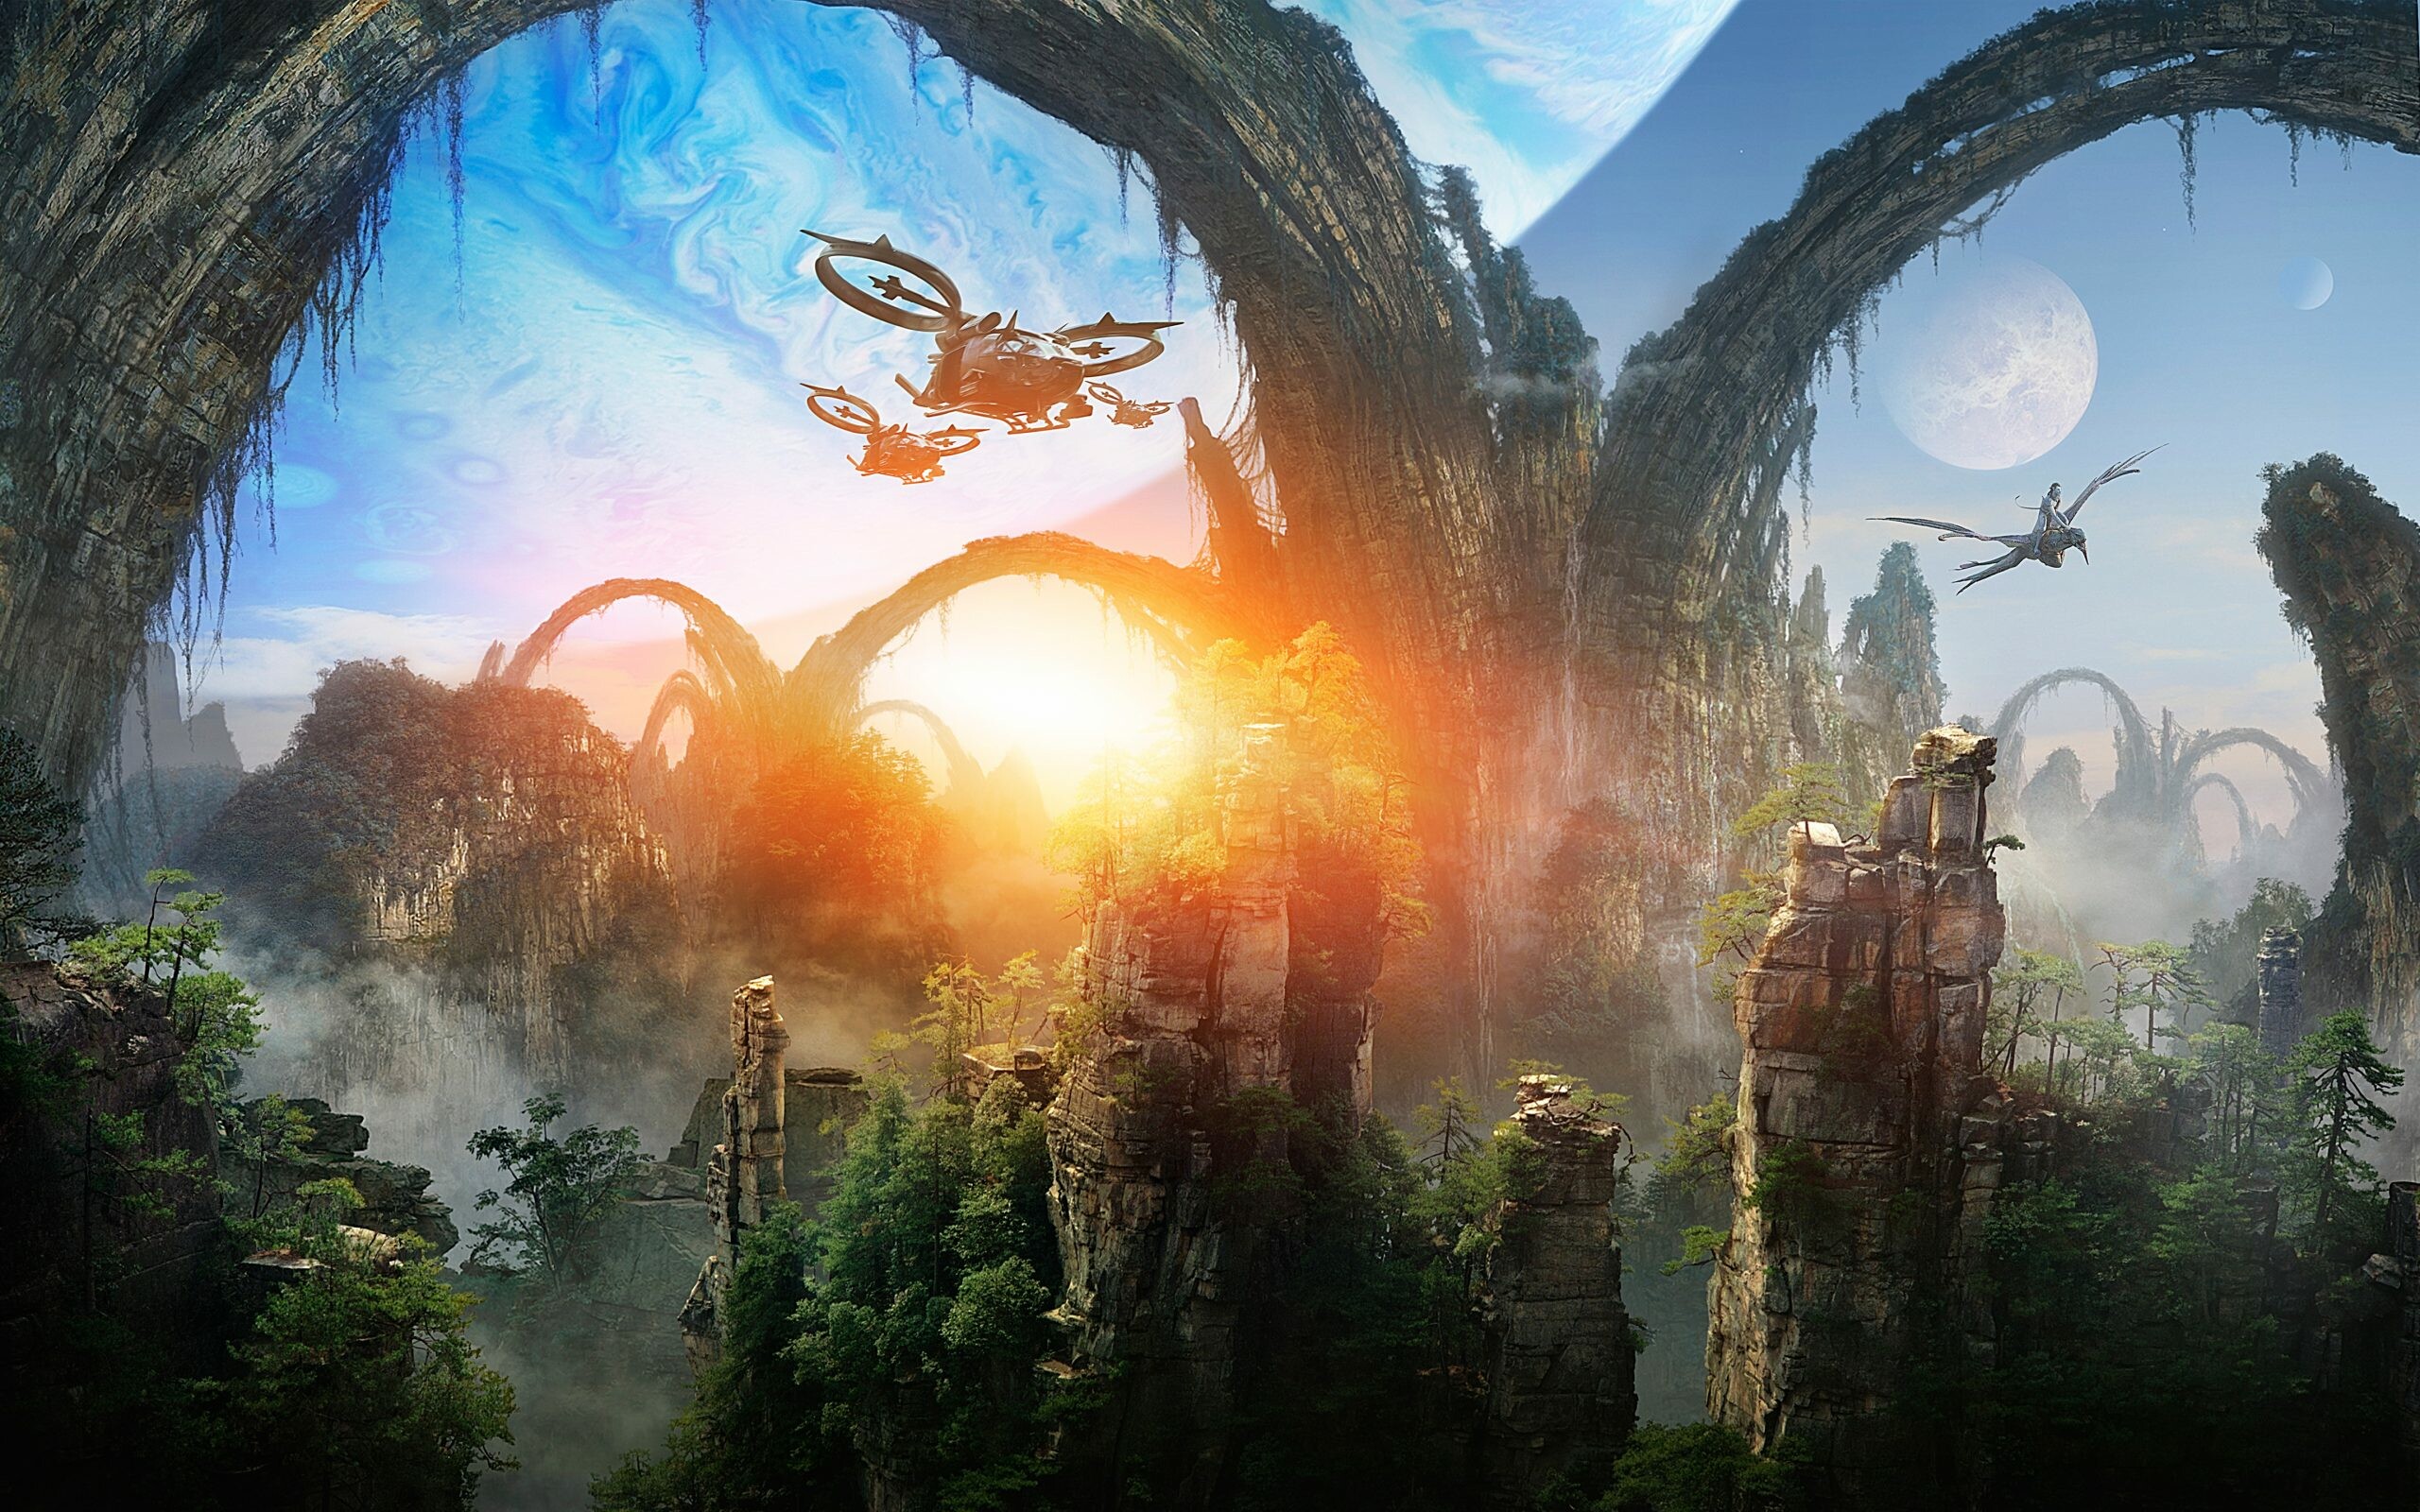 Avatar: The expansion of the mining colony threatens the continued existence of a local tribe of Na'vi – a humanoid species indigenous to Pandora. 2560x1600 HD Background.